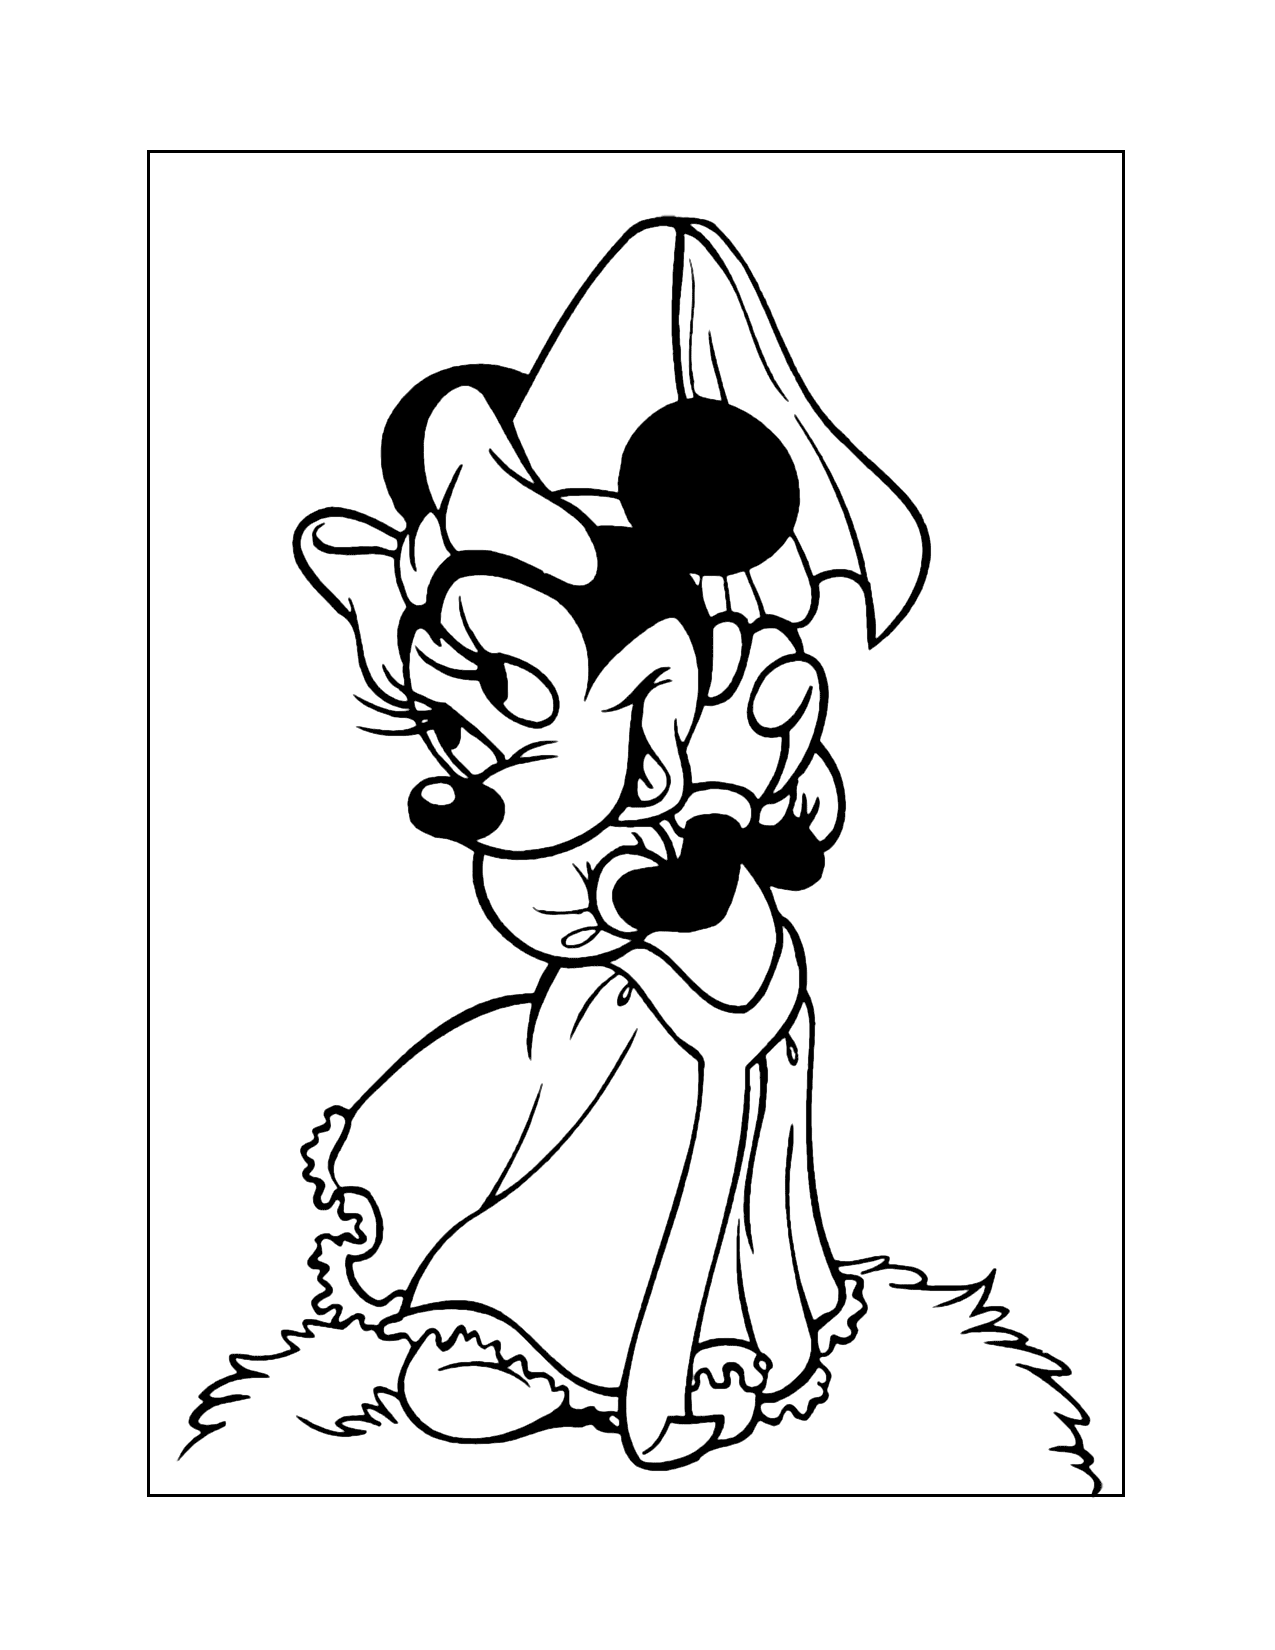 Princess Minnie Mouse Coloring Page